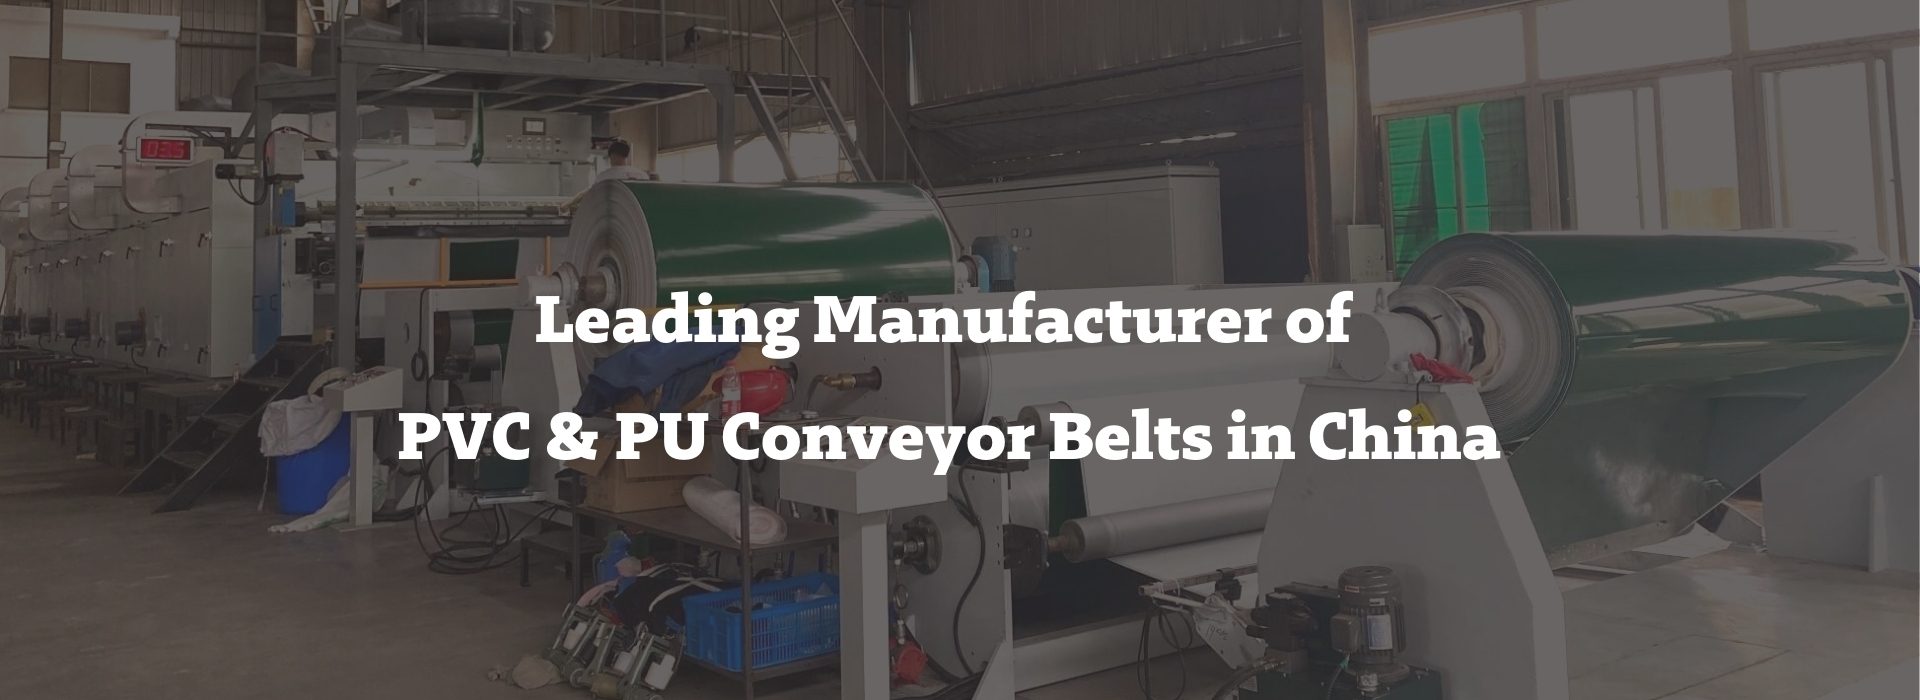 Leading Manufacturer of PVC & PU Conveyor Belts in China